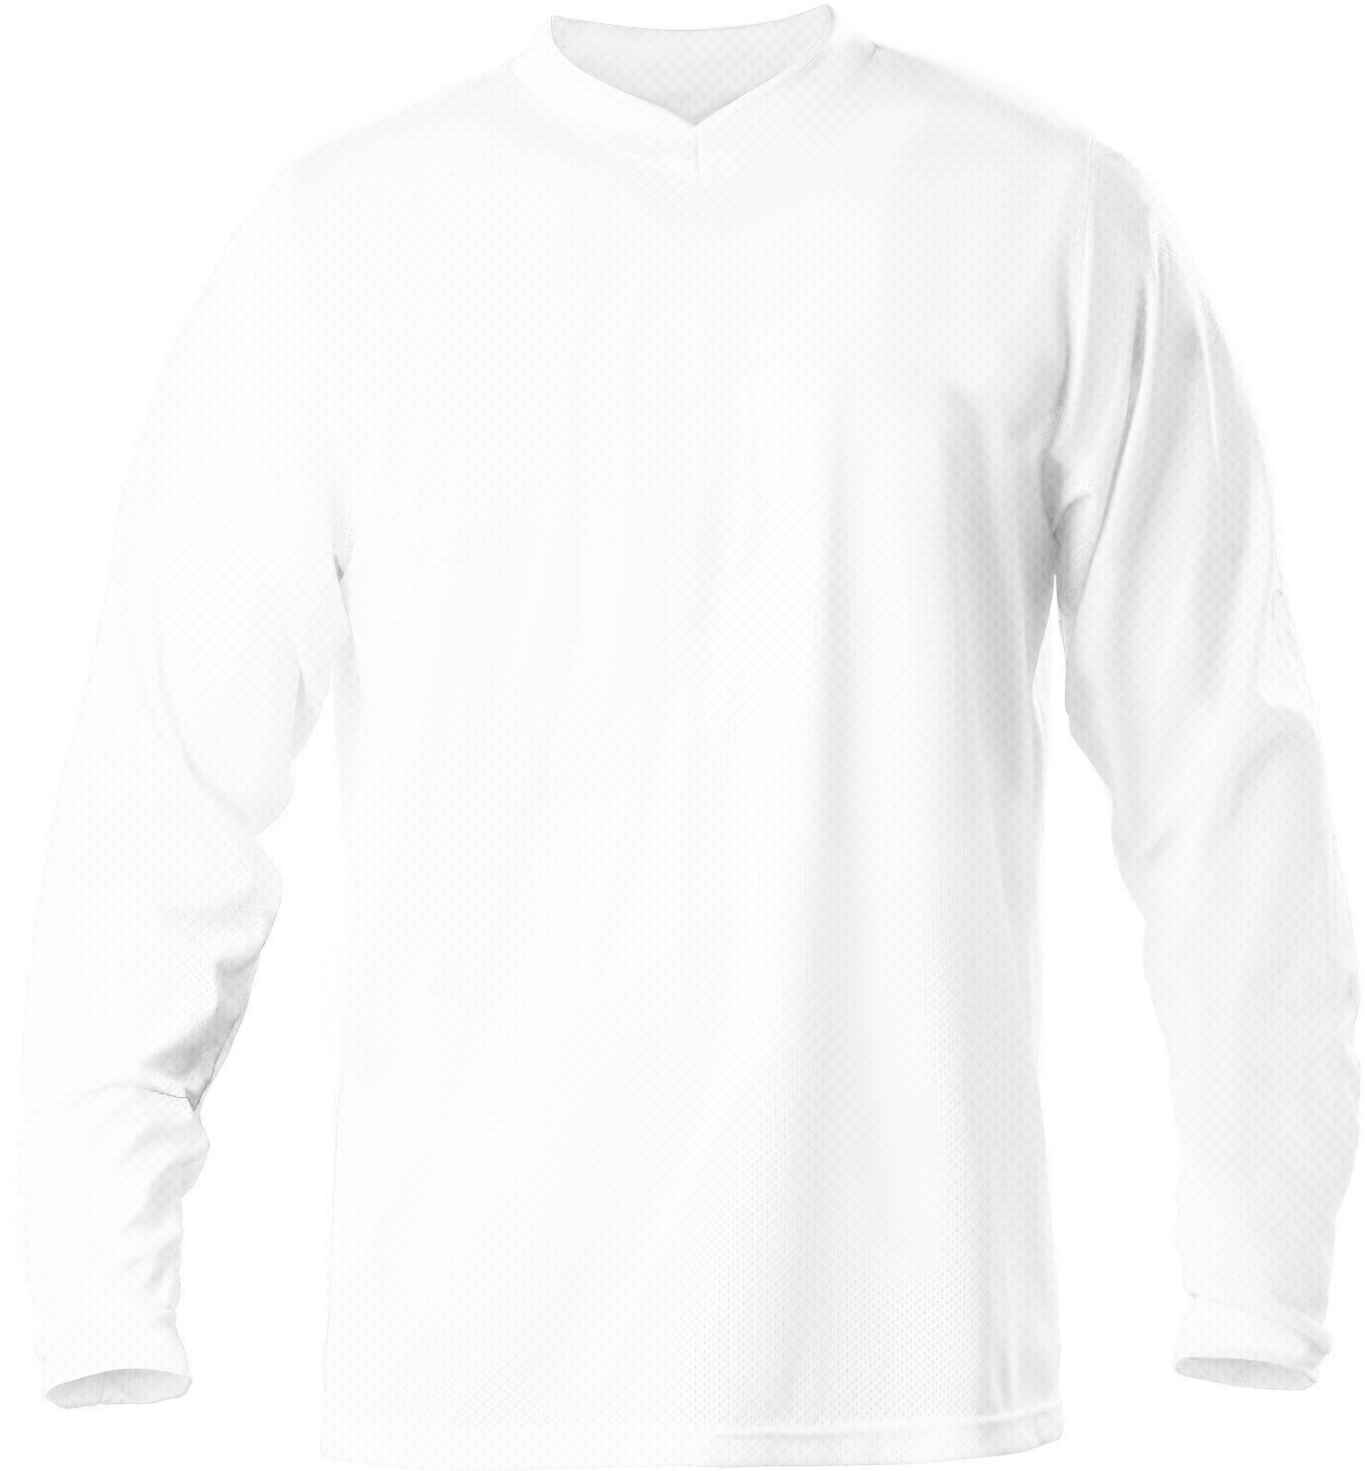 Long Sleeve Jersey 1 (1) - Plain White Long Sleeve T Shirt Back (1482x1483), Png Download